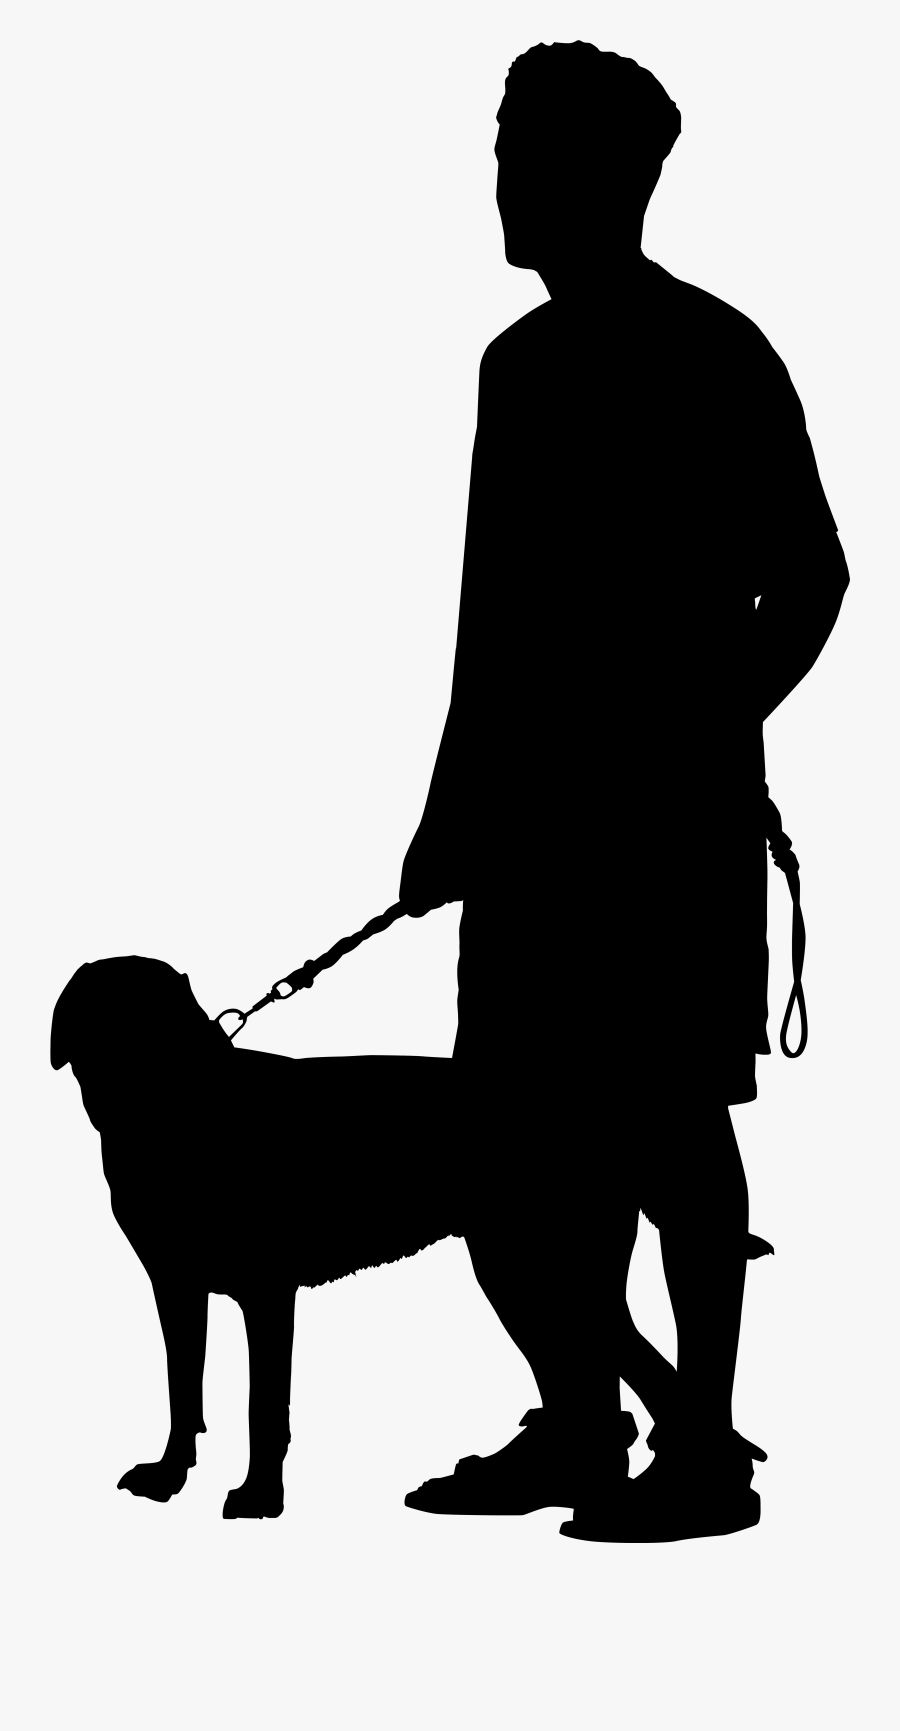 Walking Dog Silhouette Png Clipart , Png Download - Walking Dog Silhouette Png, Transparent Clipart